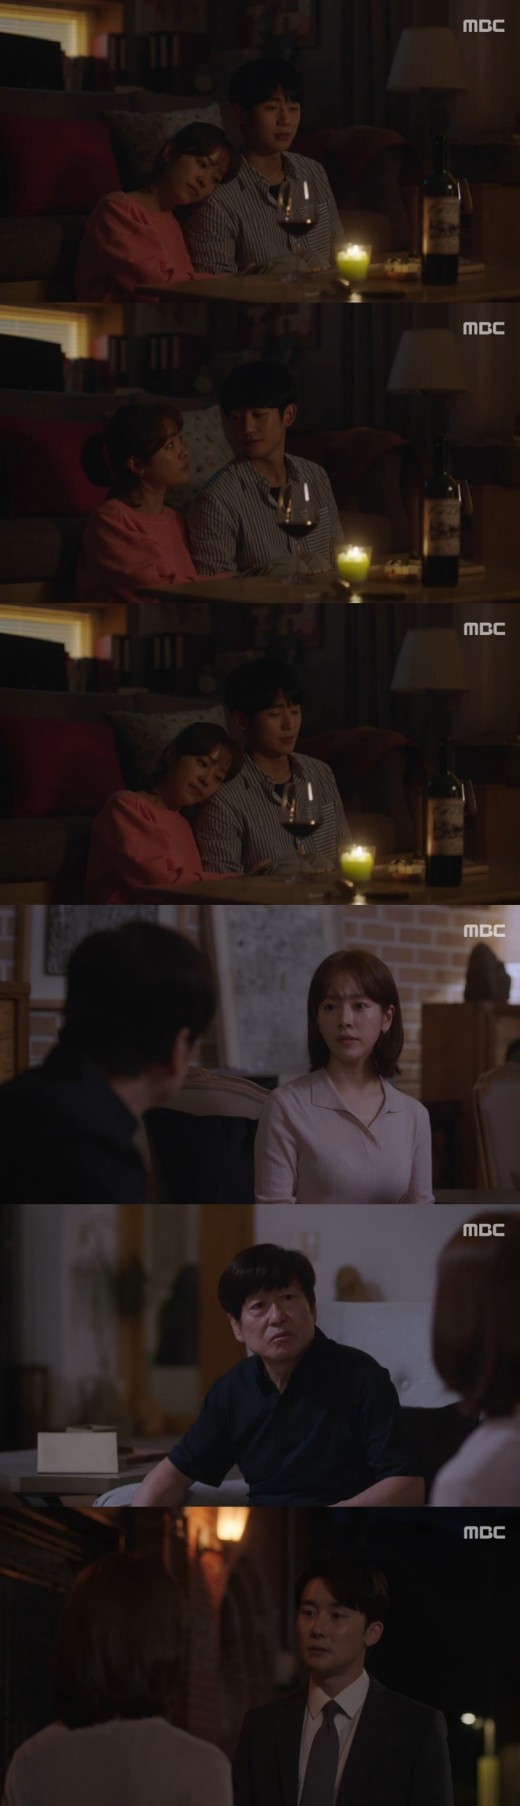 The path to father. The path to wife. Jung Hae In and Han Ji-min faced reality. What are their choices?On MBCs Spring Night broadcast on the 4th, there was a scene in which JiHo (Jung Hae In) and Choi Jung-in (Han Ji-min) insisted on marriage even against Taehak (Song Seung-hwan).On this day, Choi Jung-in revealed his relationship with JiHo in Taehak, but opposed the relationship between the two, saying that Taehak should never be done.JiHo was worried about Choi Jung-in, but she tried to find her house, but Jae-in was far from being dismissed.All JiHo can do is wrap around a sick Choi Jung-in. Choi Jung-in leans on JiHo and says, Do you know what I thanked for meeting Mr. JiHo?I have a man who can think before myself. And courage. What I thought was courage was a valiant disguised passenger.When JiHo said, I am going to have to go through something that I do not have to go through with. Choi Jung-in laughed, I told you, do not excuse me to leave for you.JiHo said, I like courage and braveness, but I look forward to my mind as I am now.JiHo then says, I have been hurt a lot at home, I have become a hurt person. Choi Jung-in said, Do not be hard.Because whoever is this Choi Jung-ins JiHo, he said.On that day, Choi Jung-in visited England (Kim Chang-wan) and offered a picture of JiHo, which was sent by the UK to Taehak.Choi Jung-in said, Thank you, I didnt dare tell my parents, but I felt cool.When the British asked, Is the picture true?, Choi Jung-in said, It is all true. Please give me the original photo.It was unfairly taken and I feel uncomfortable having it. Still, the steer said, You cant go with JiHo. Why did you meet me? Because I loved you?I like to be more than a person who is not there, so I can not say that it is not love. Choi Jung-in said, I was wrong. Im sorry I betrayed you and hurt you. I dont ask for forgiveness.Im not good enough, he said, but the steer dismissed him as just come back. Choi Jung-in returned the ring to the steer and said, Now my brother is not enough.Im more greedy, he said, and announced the full end.JiHos anxiety is that the mother of Eunwoo can always appear and take the child.JiHo, who exudes this anxiety with tears, and Choi Jung-in, who realizes the reality and is shaken by it, raised questions about the ending of Spring Night.